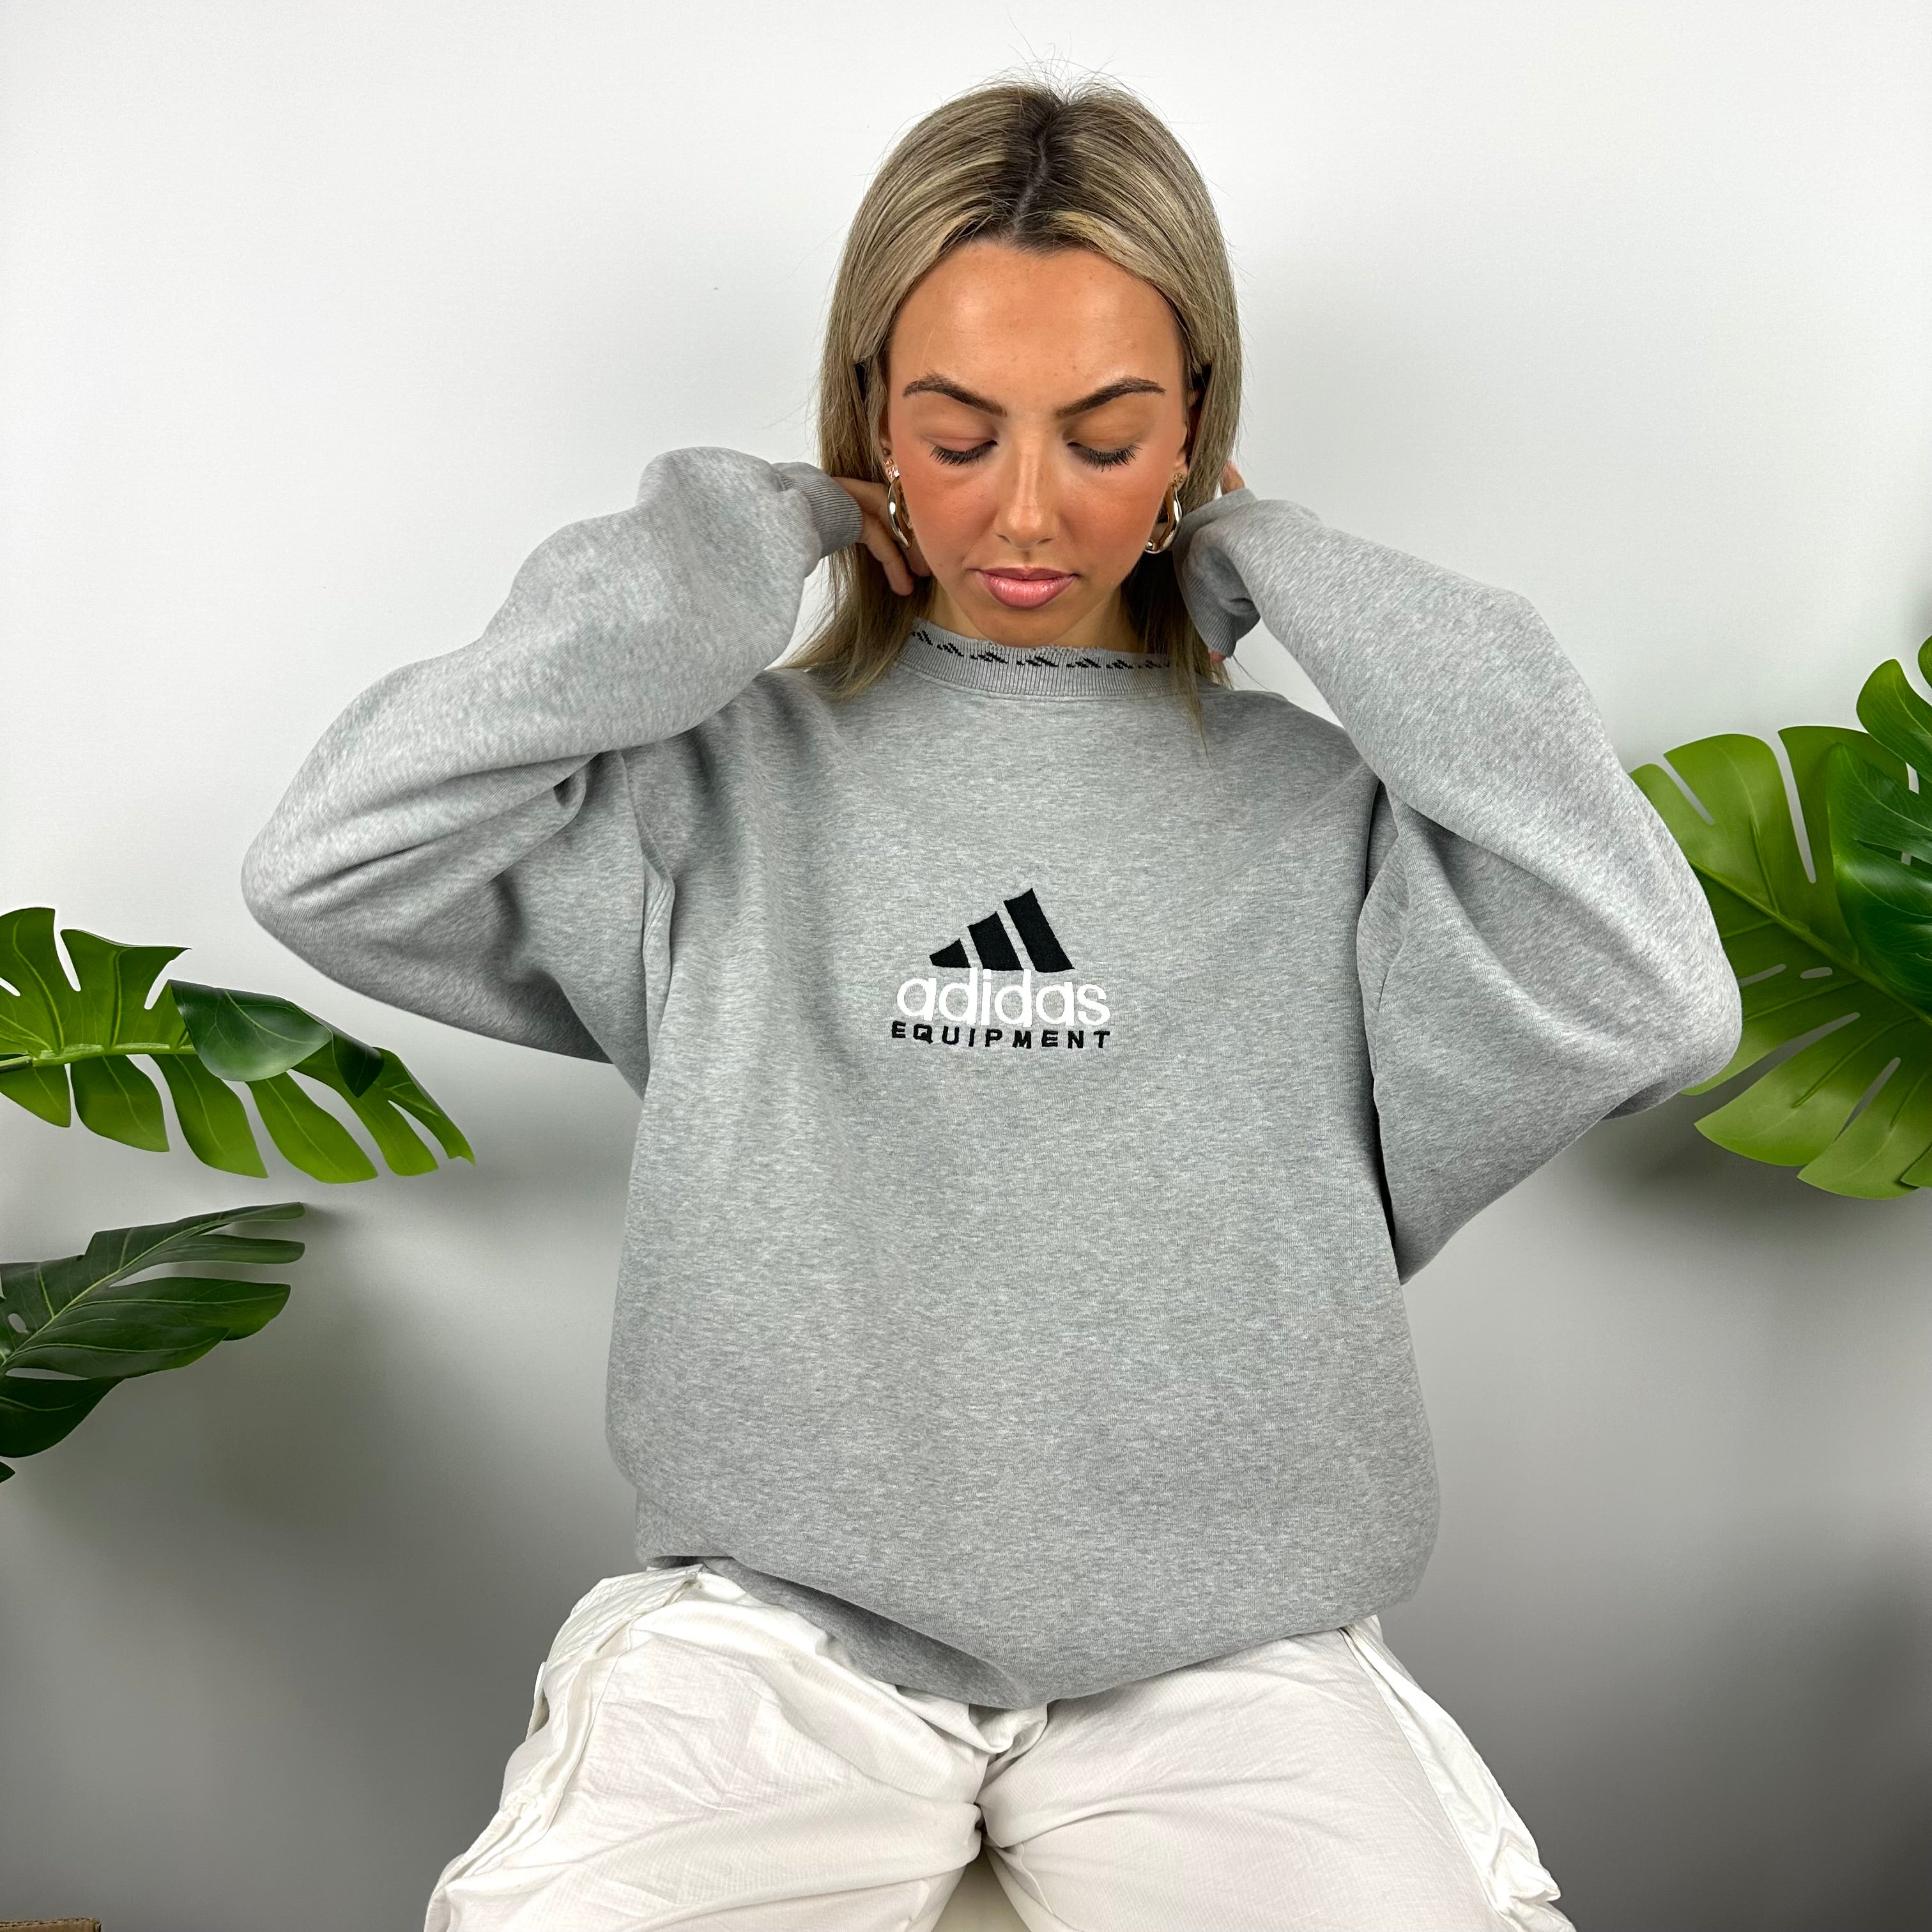 Adidas Equipment RARE Grey Embroidered Spell Out Sweatshirt (XL)